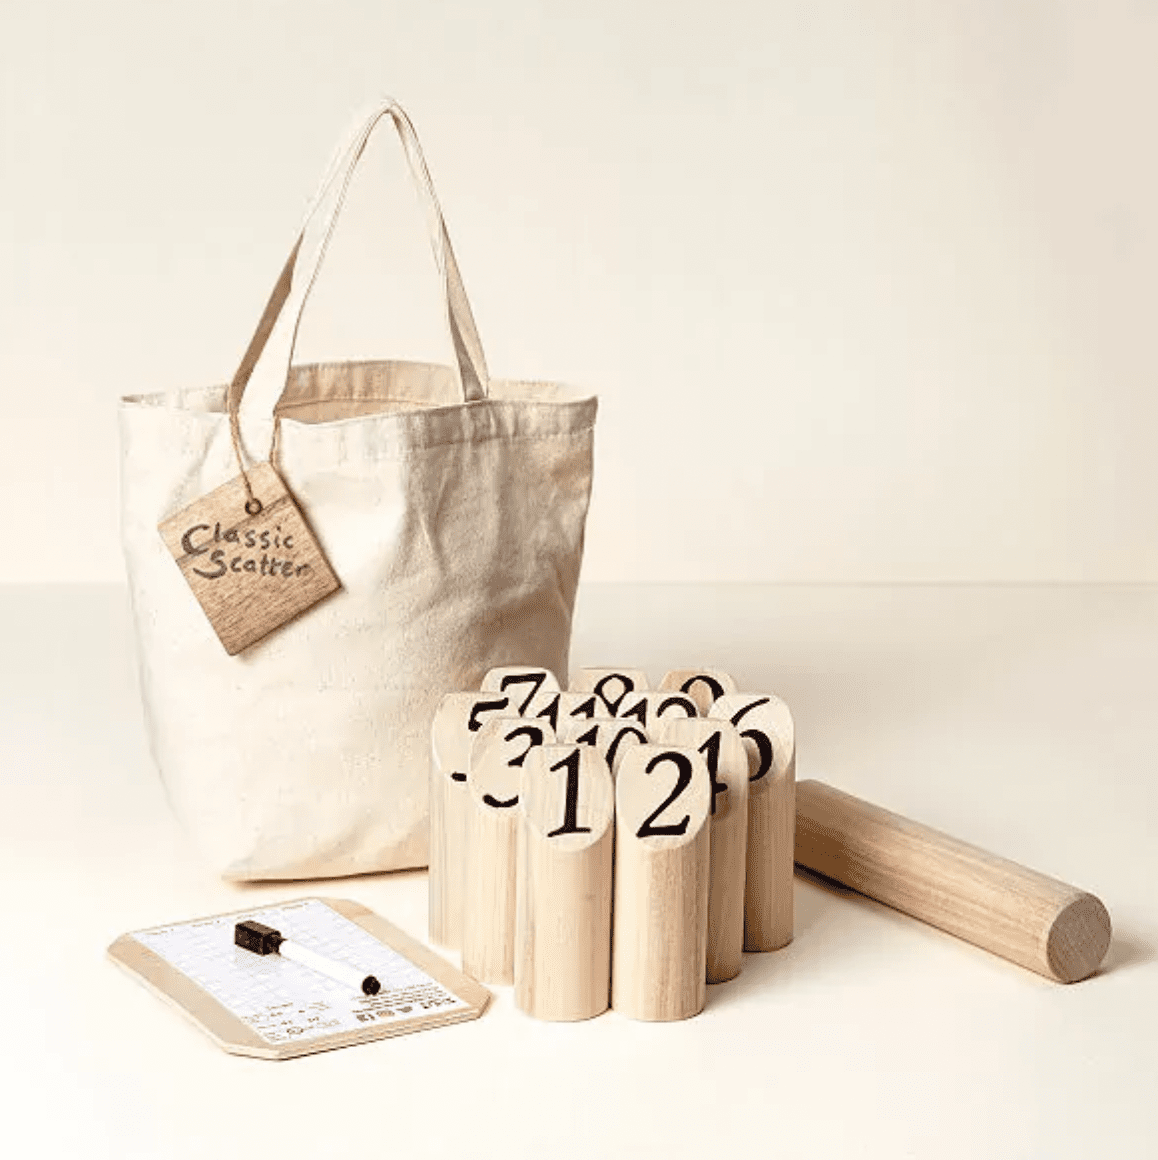 Wooden lawn game with a canvas tote